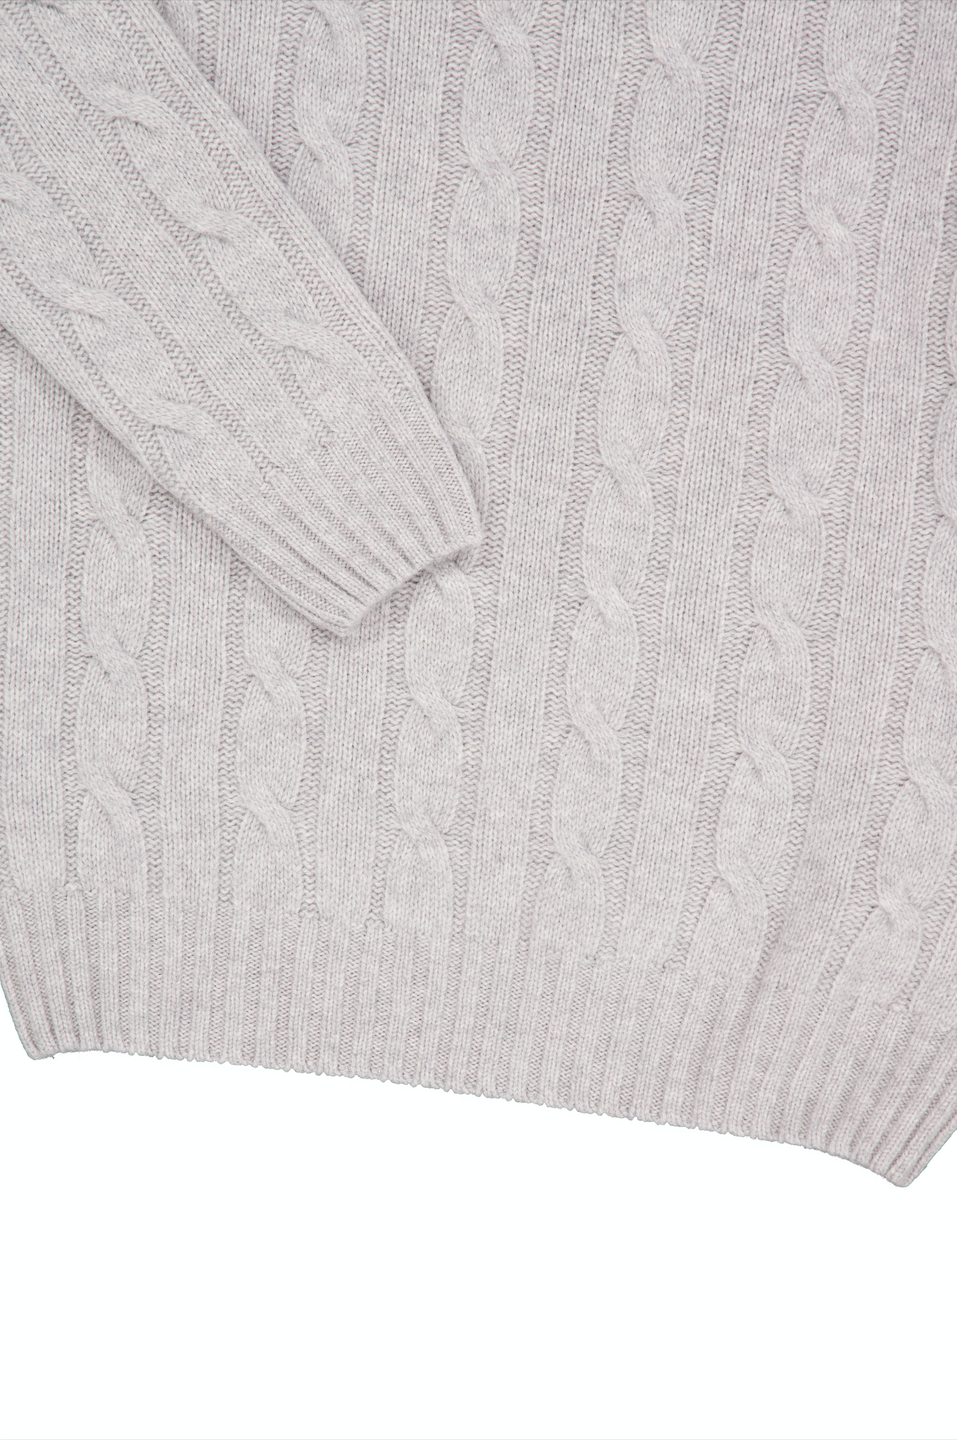 Scottish Heritage Wool Cable Knit Sweater Grey